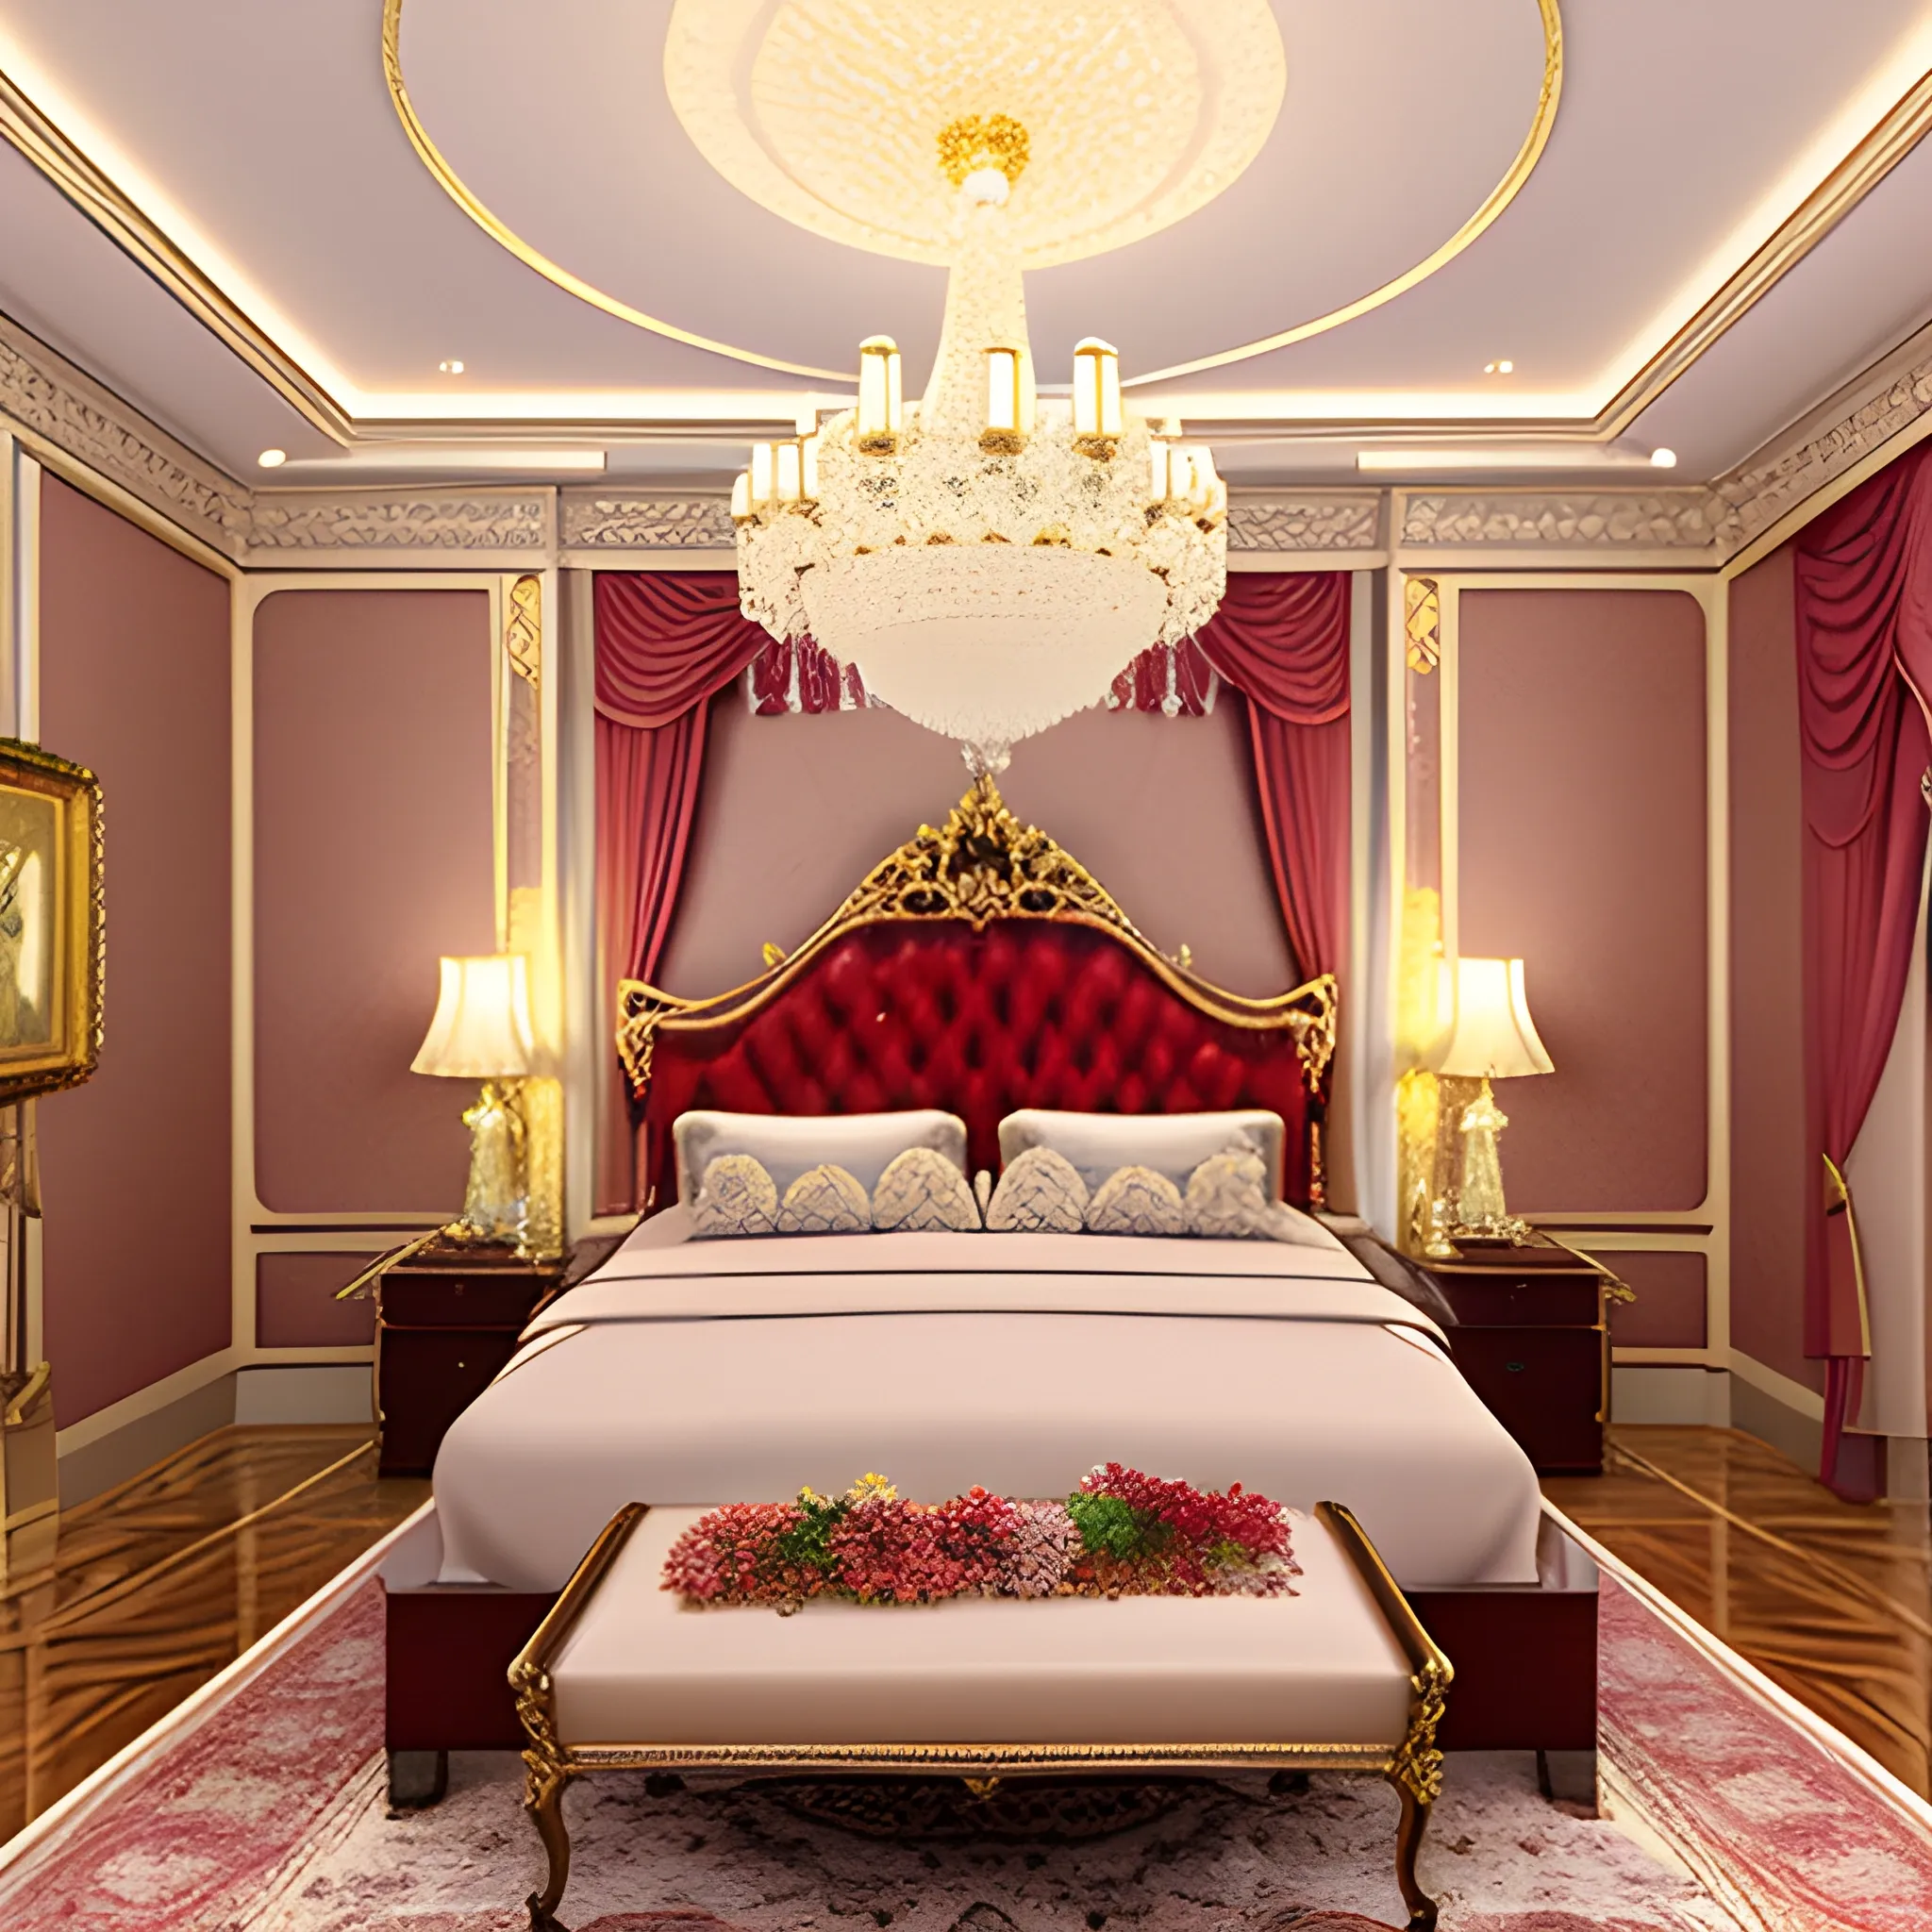 , 3D,  palace room, elegance, chandelier, renacentist, queen in a room, girl in a room, candles, fantasy